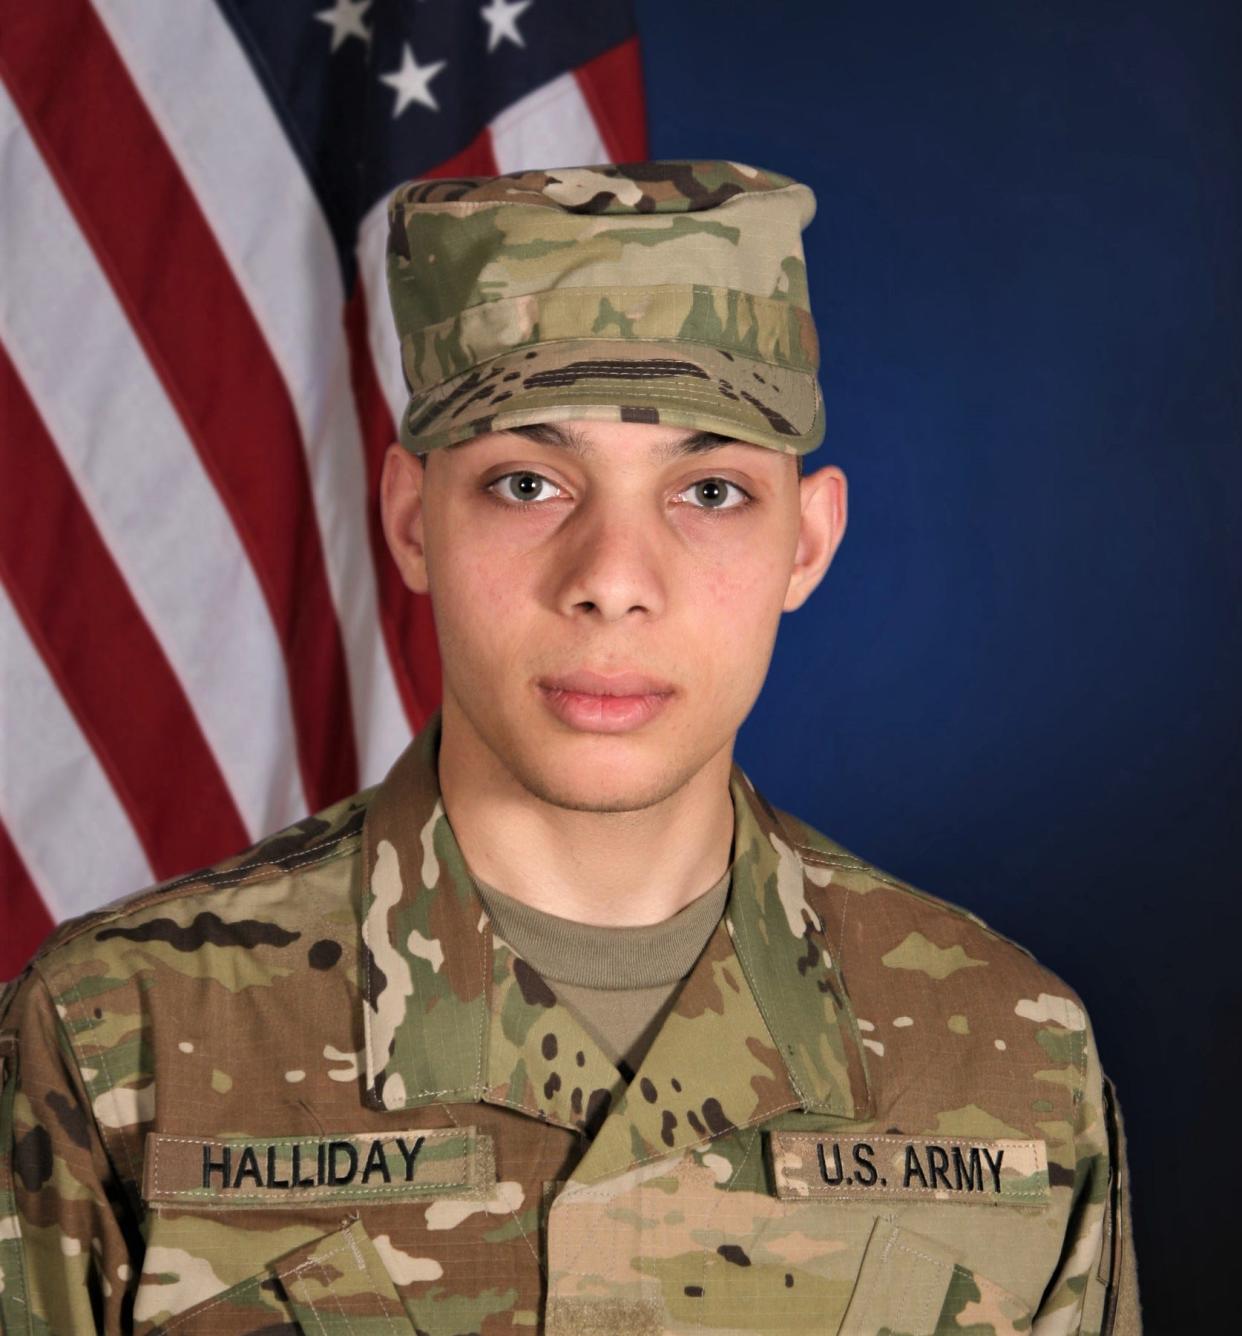 Pvt. Richard Halliday has been missing from Fort Bliss since July 24, 2020.